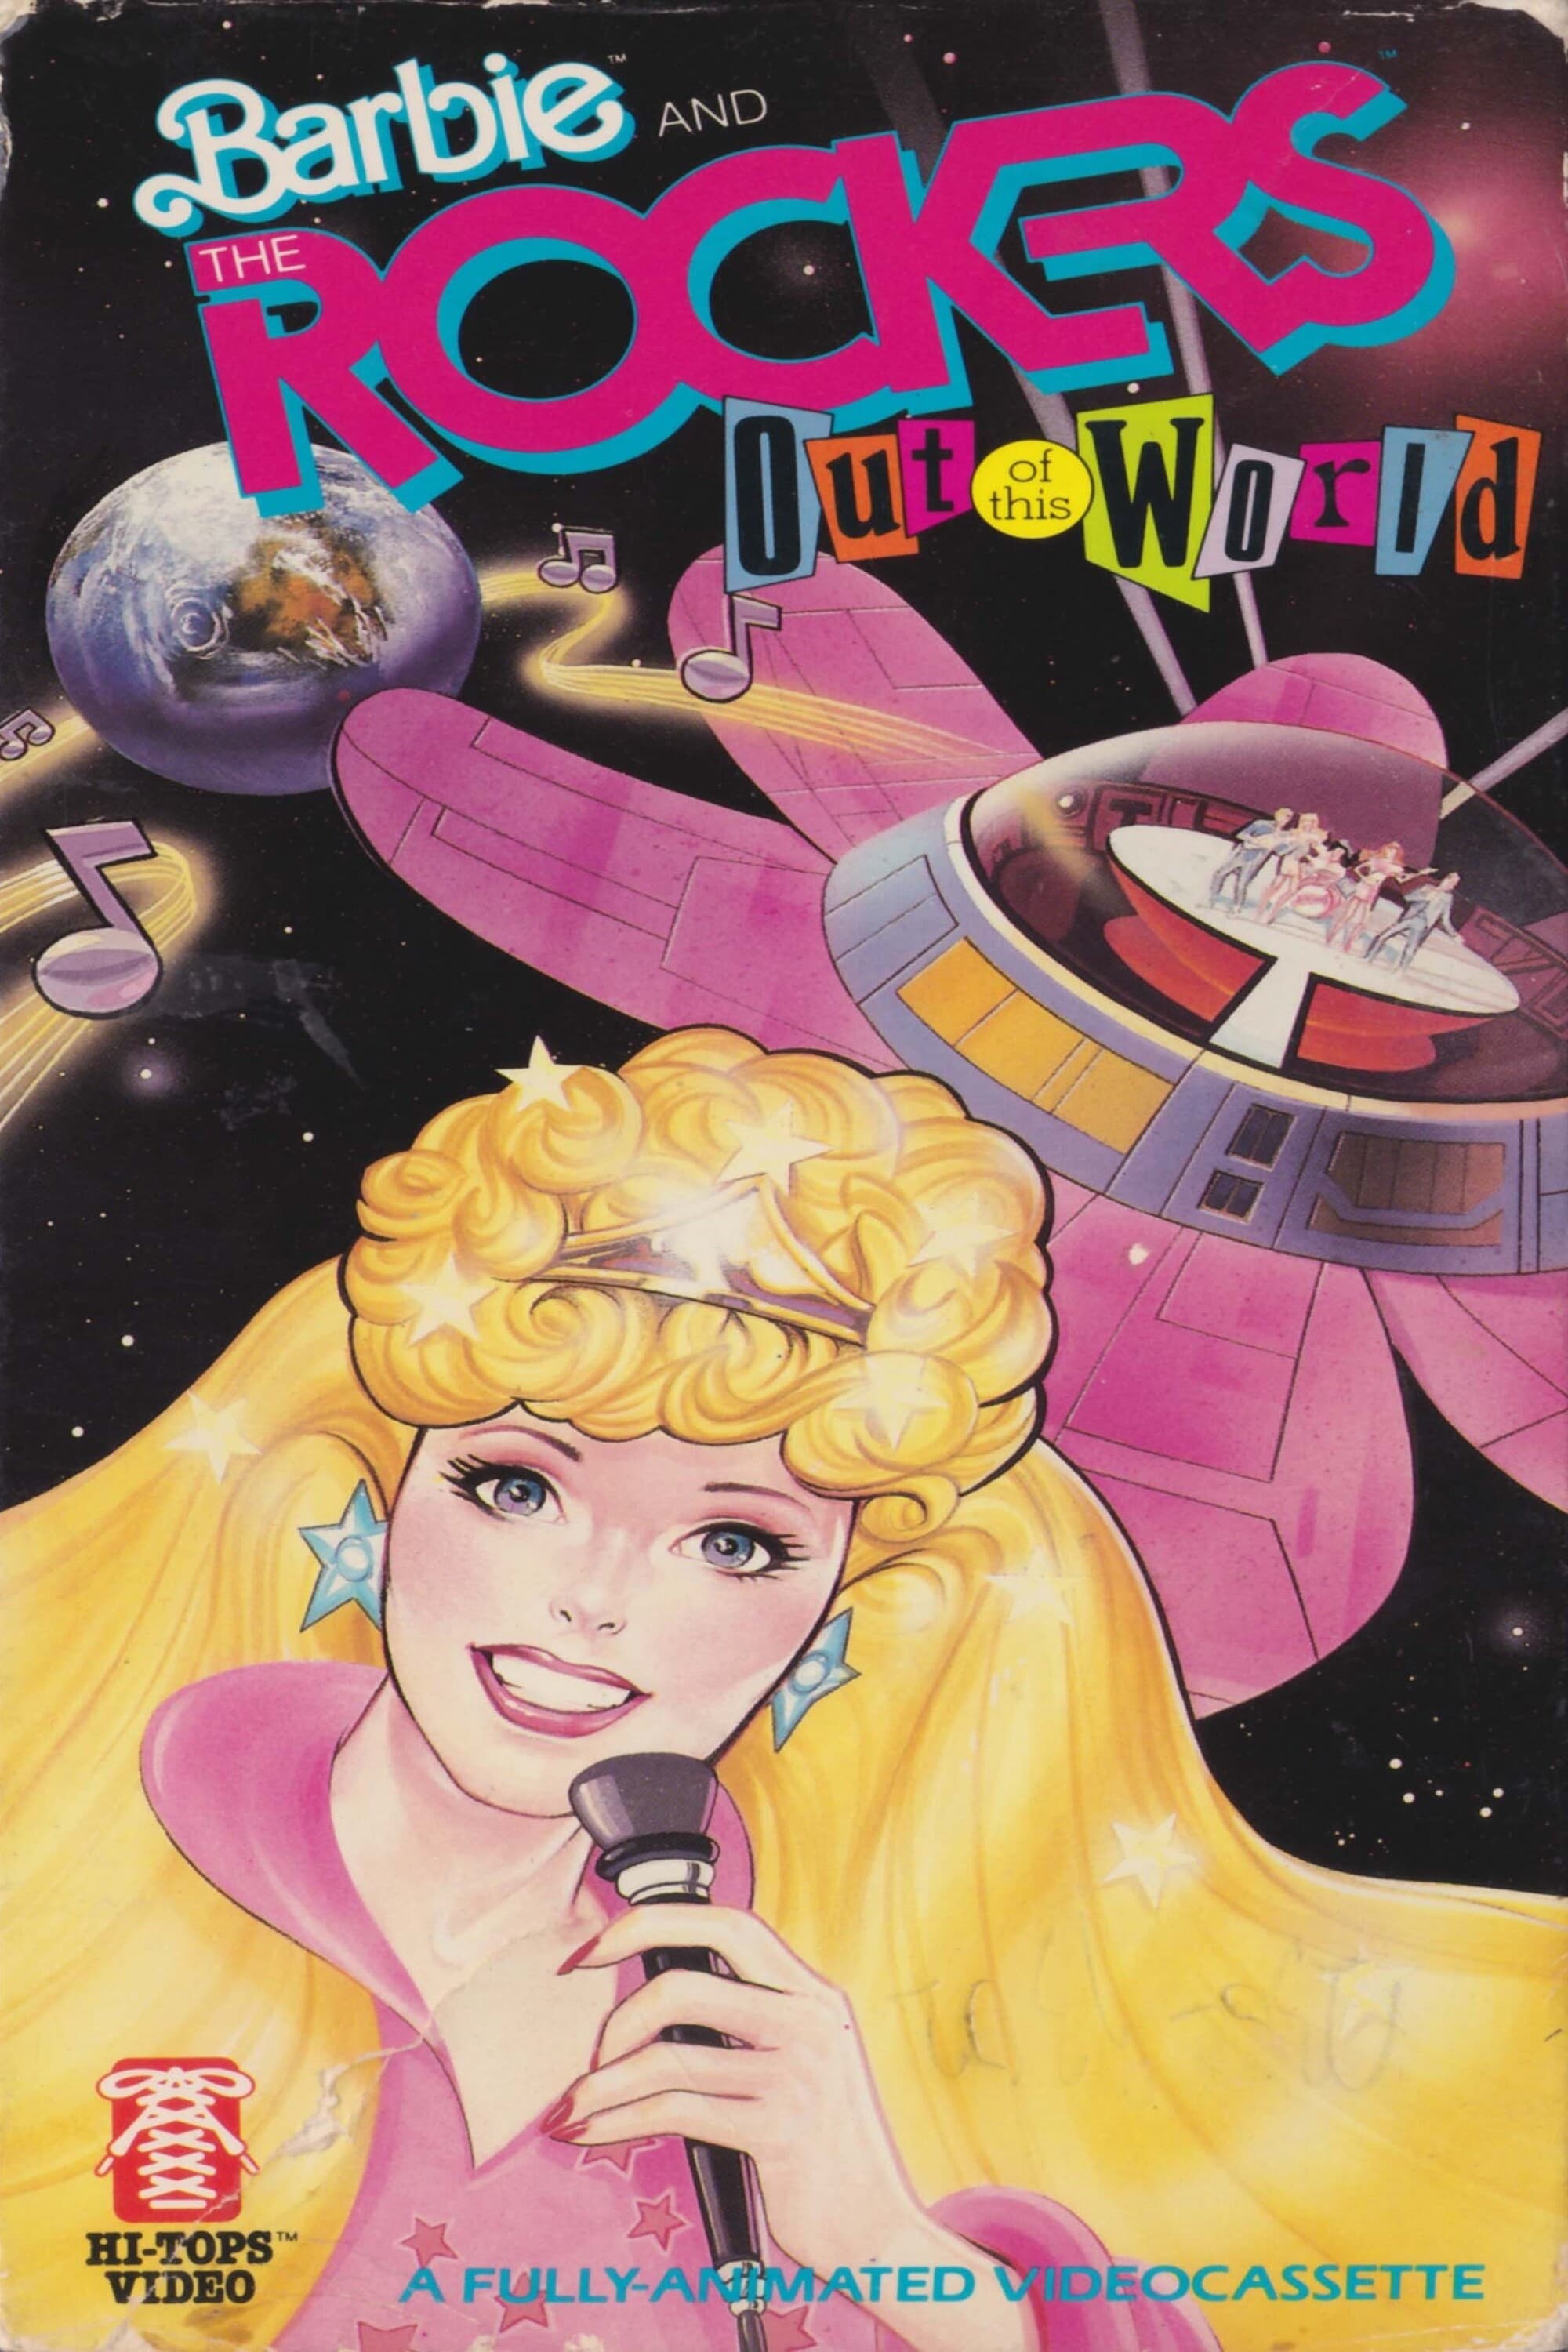 Barbie and the Rockers: Out of This World (1987)